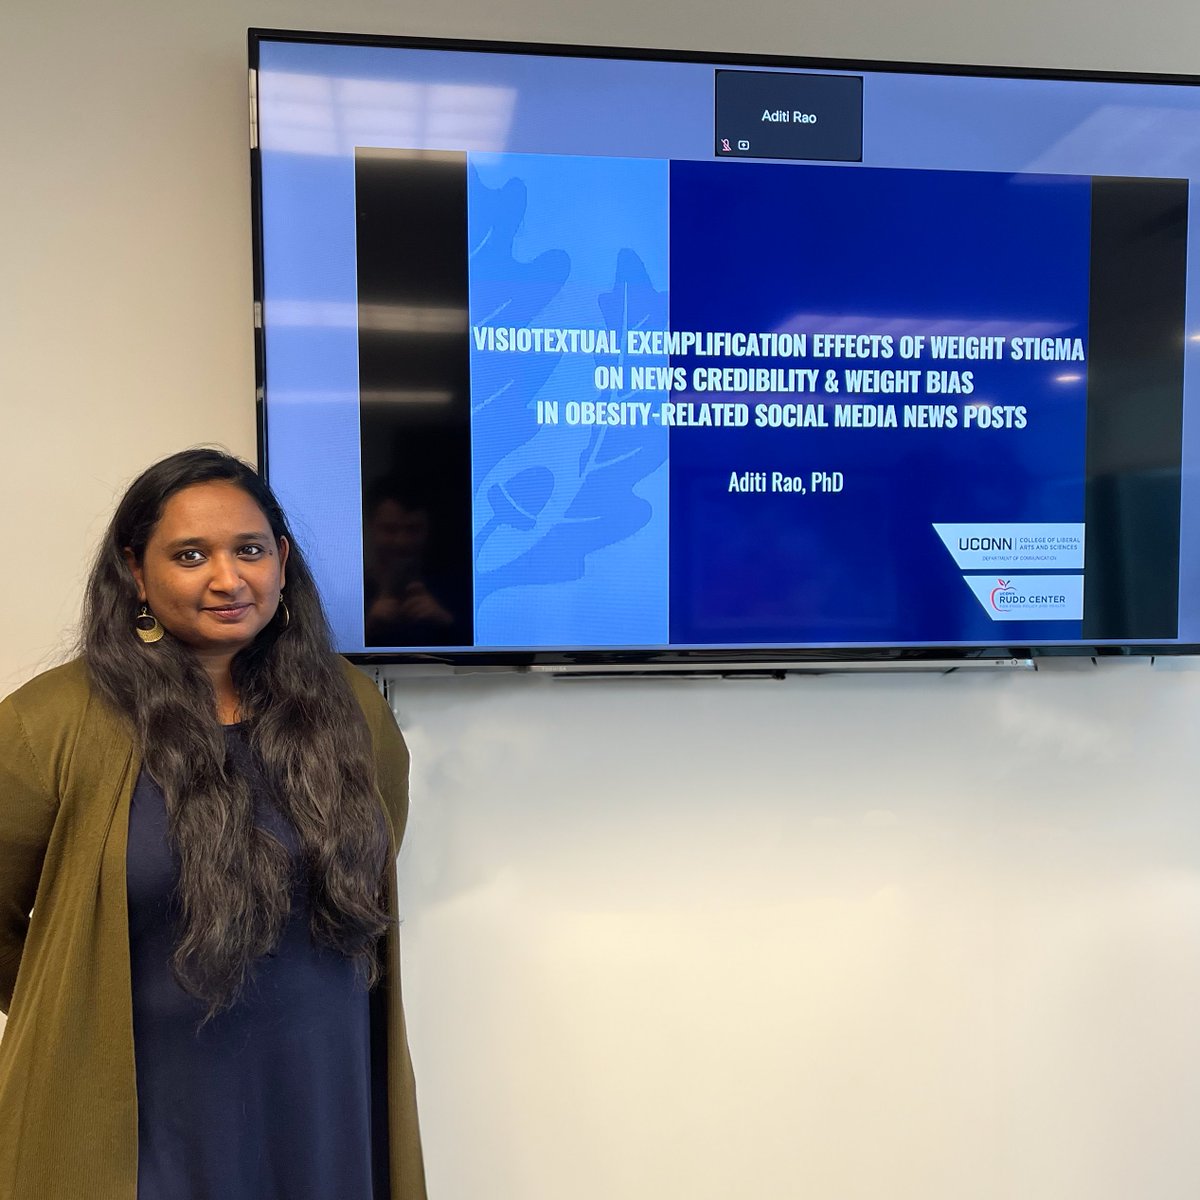 Today, Aditi Rao returned to the Rudd Center to present her dissertation research on weight stigma in news images. Aditi was a Rudd Communications Assistant from 2018 - 2022, and she recently received her PhD from the UConn Department of Communications!